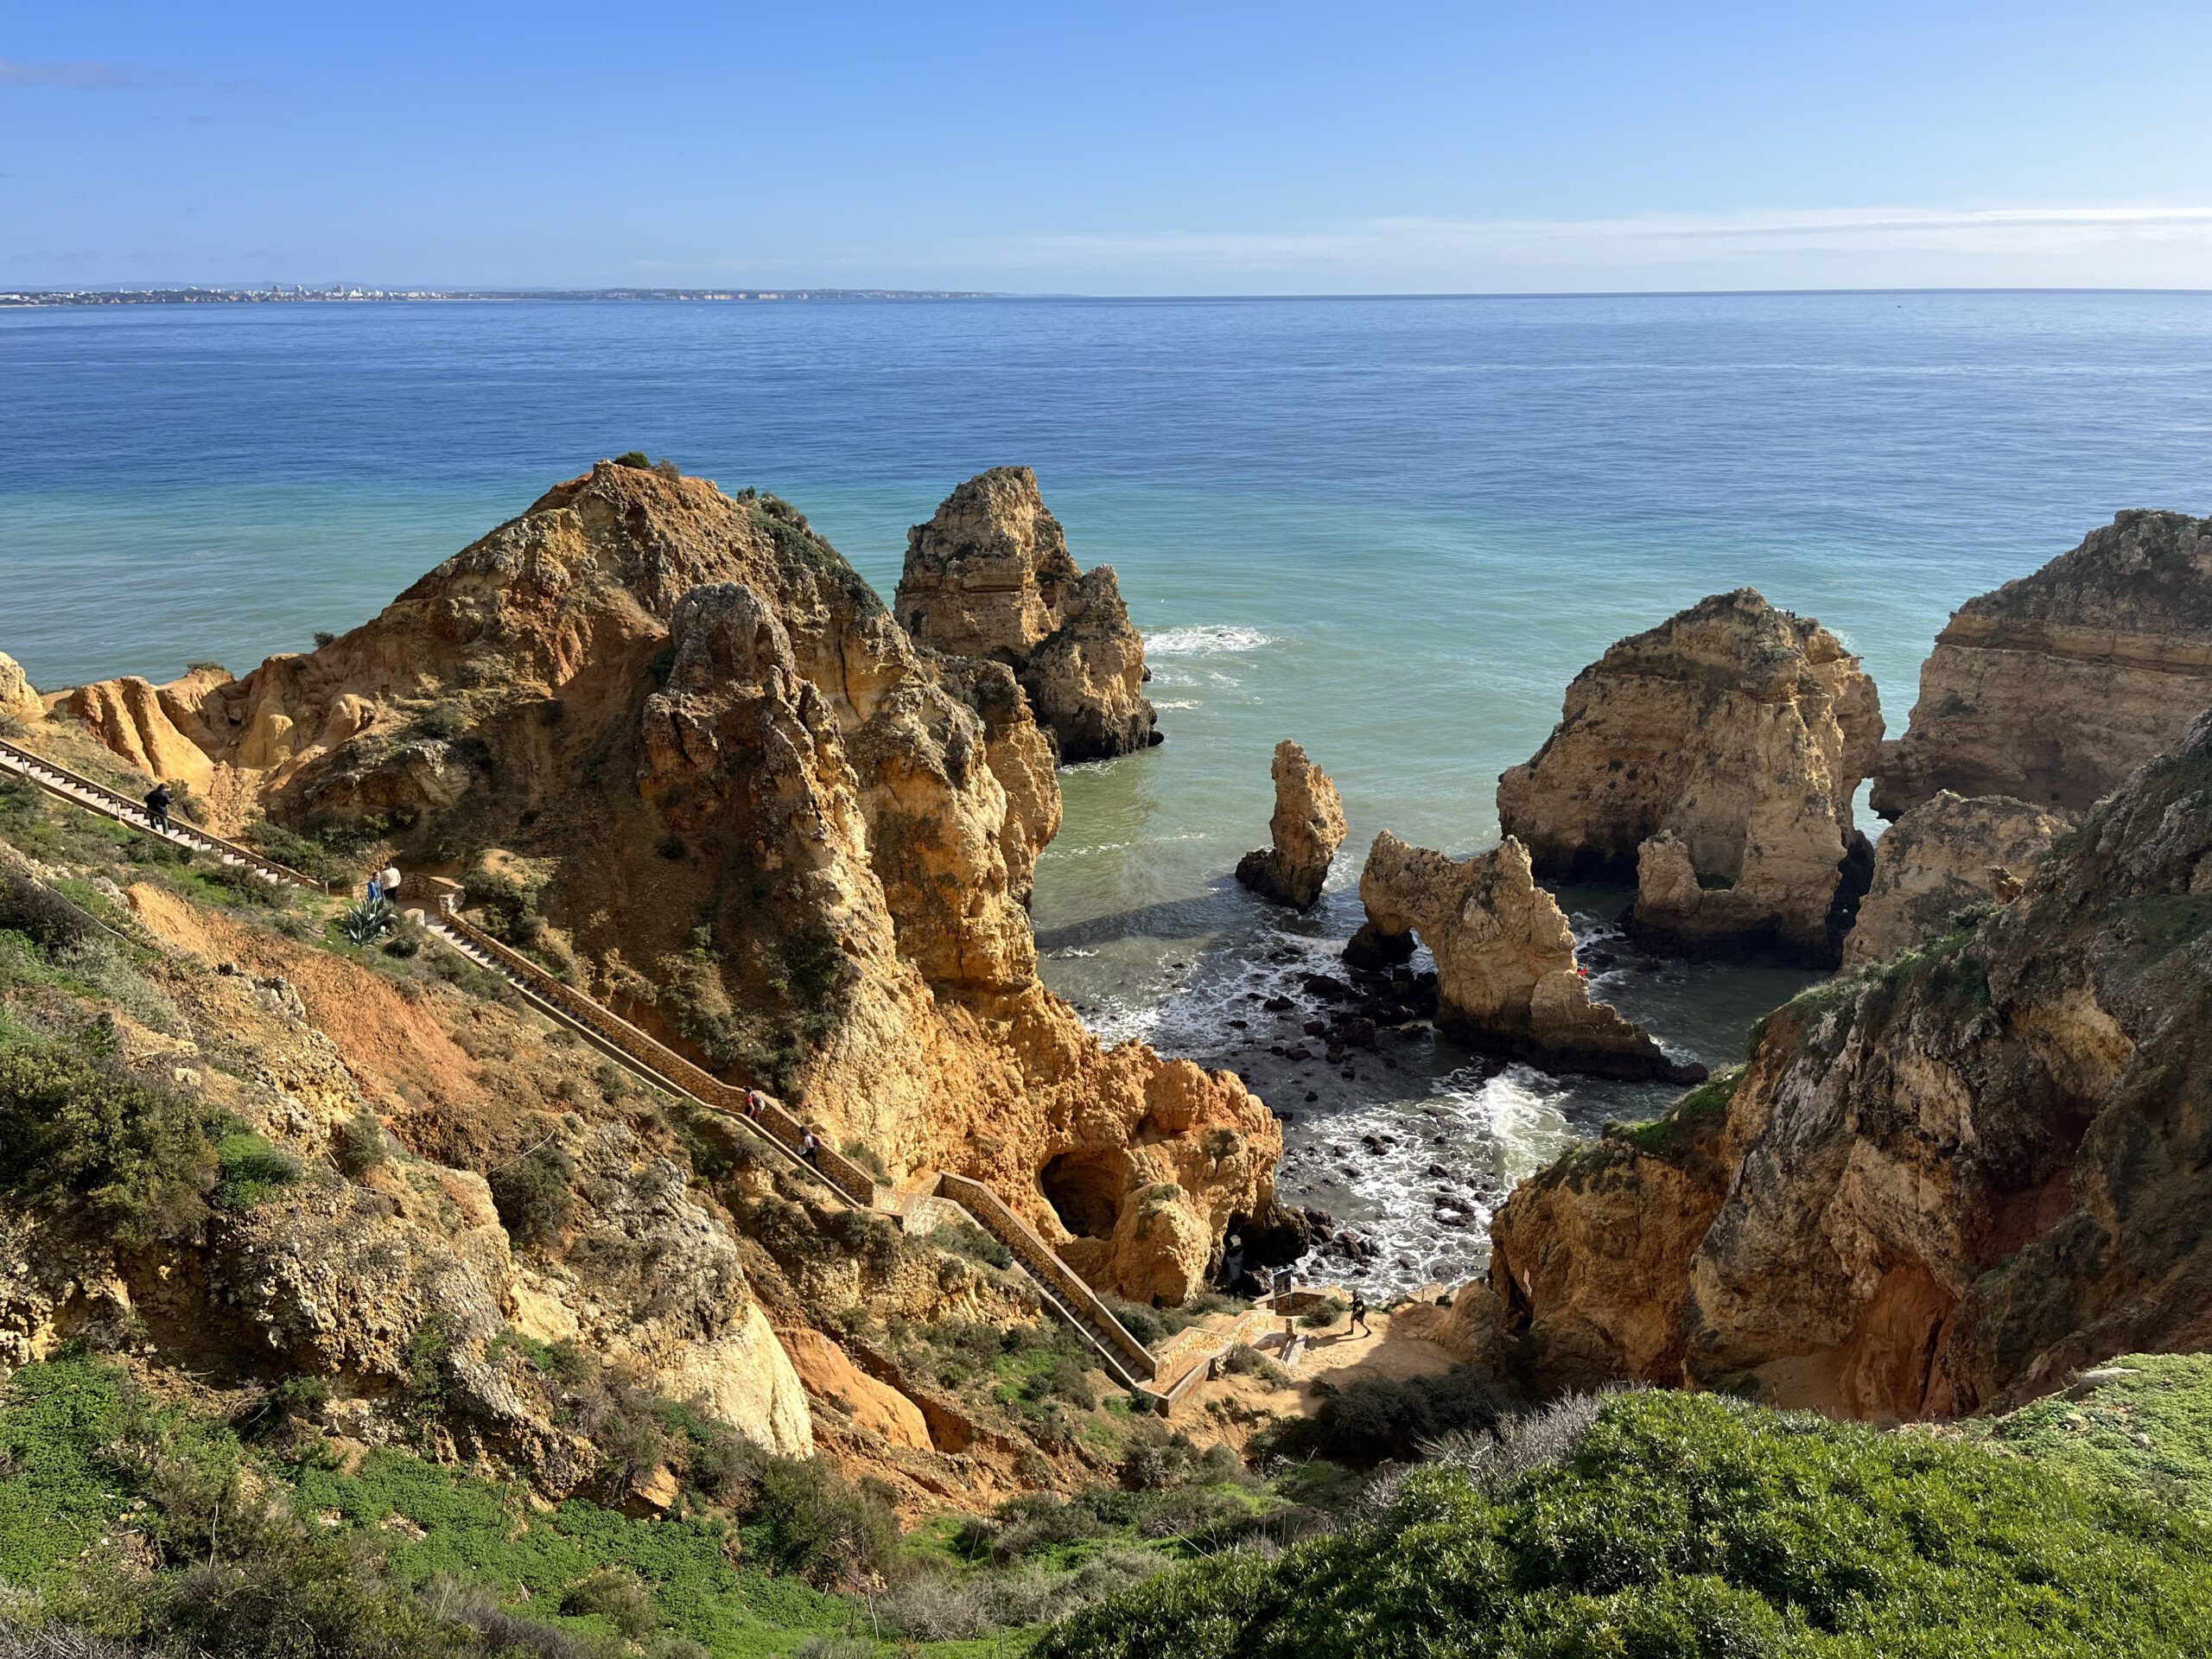 The south coast of Portugal, with the Mediterranean Sea and orange cliffs